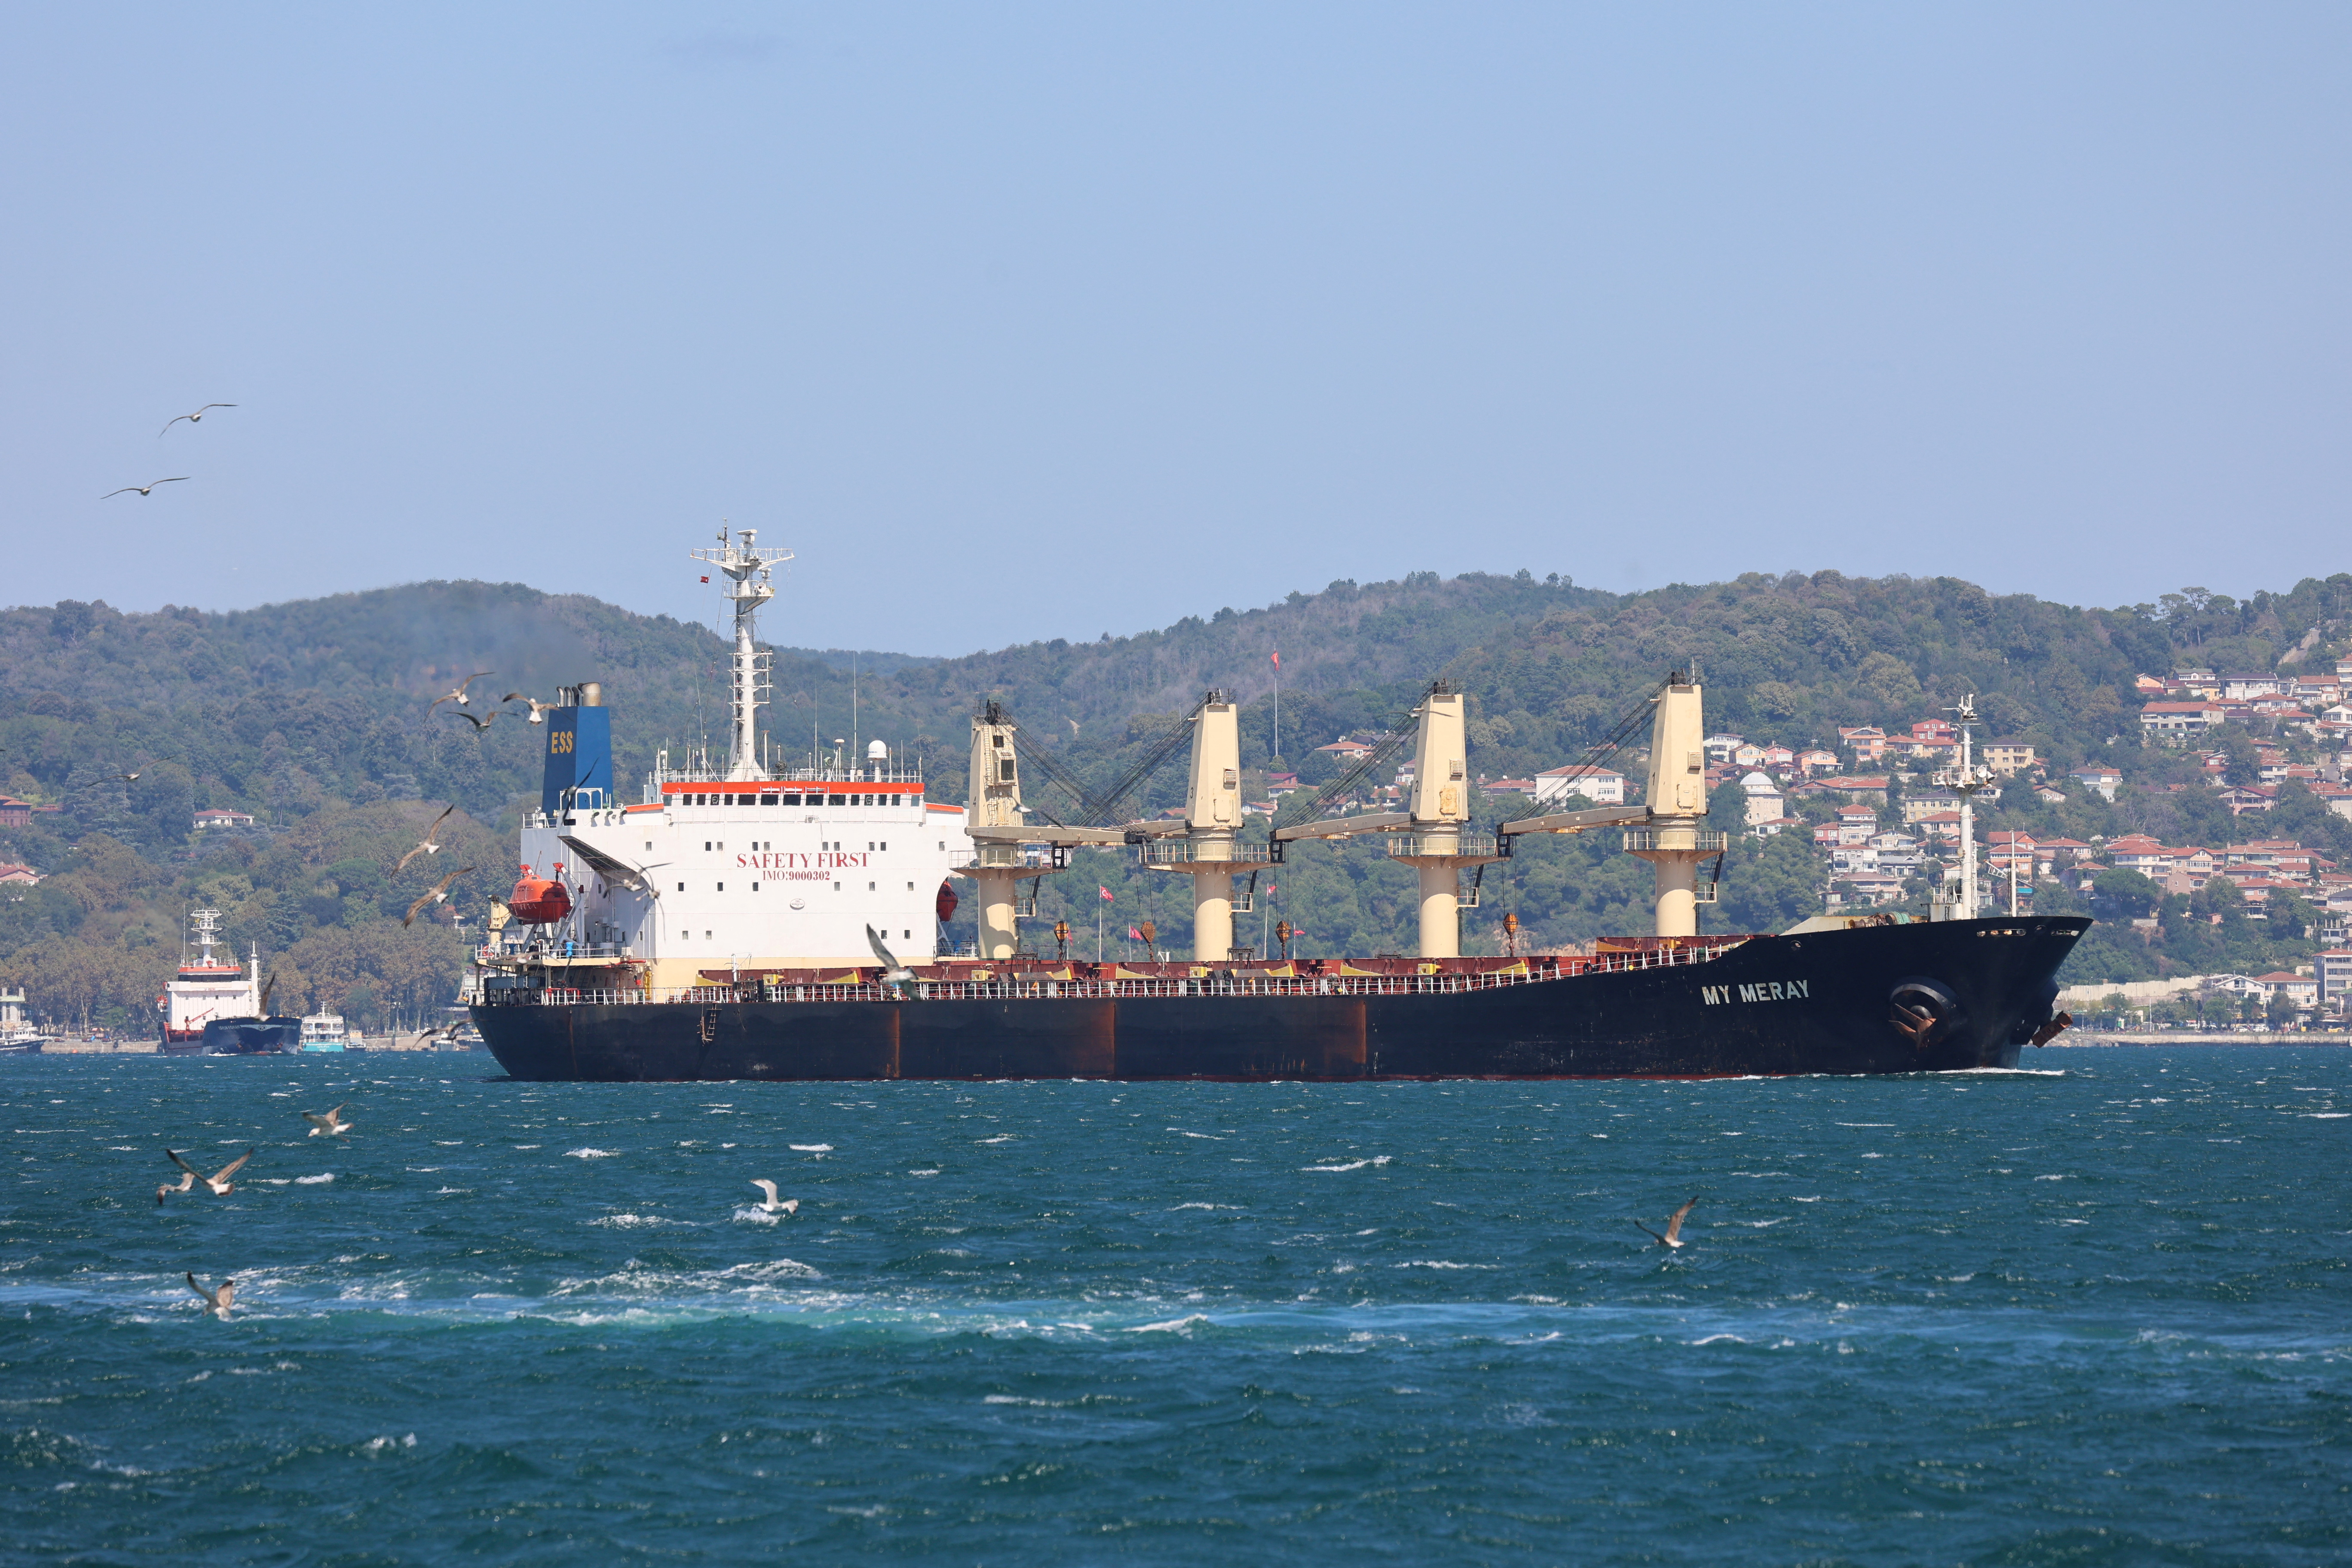 The Belize-flagged My Meray carrying Ukrainian grain sails in Istanbul's Bosphorus